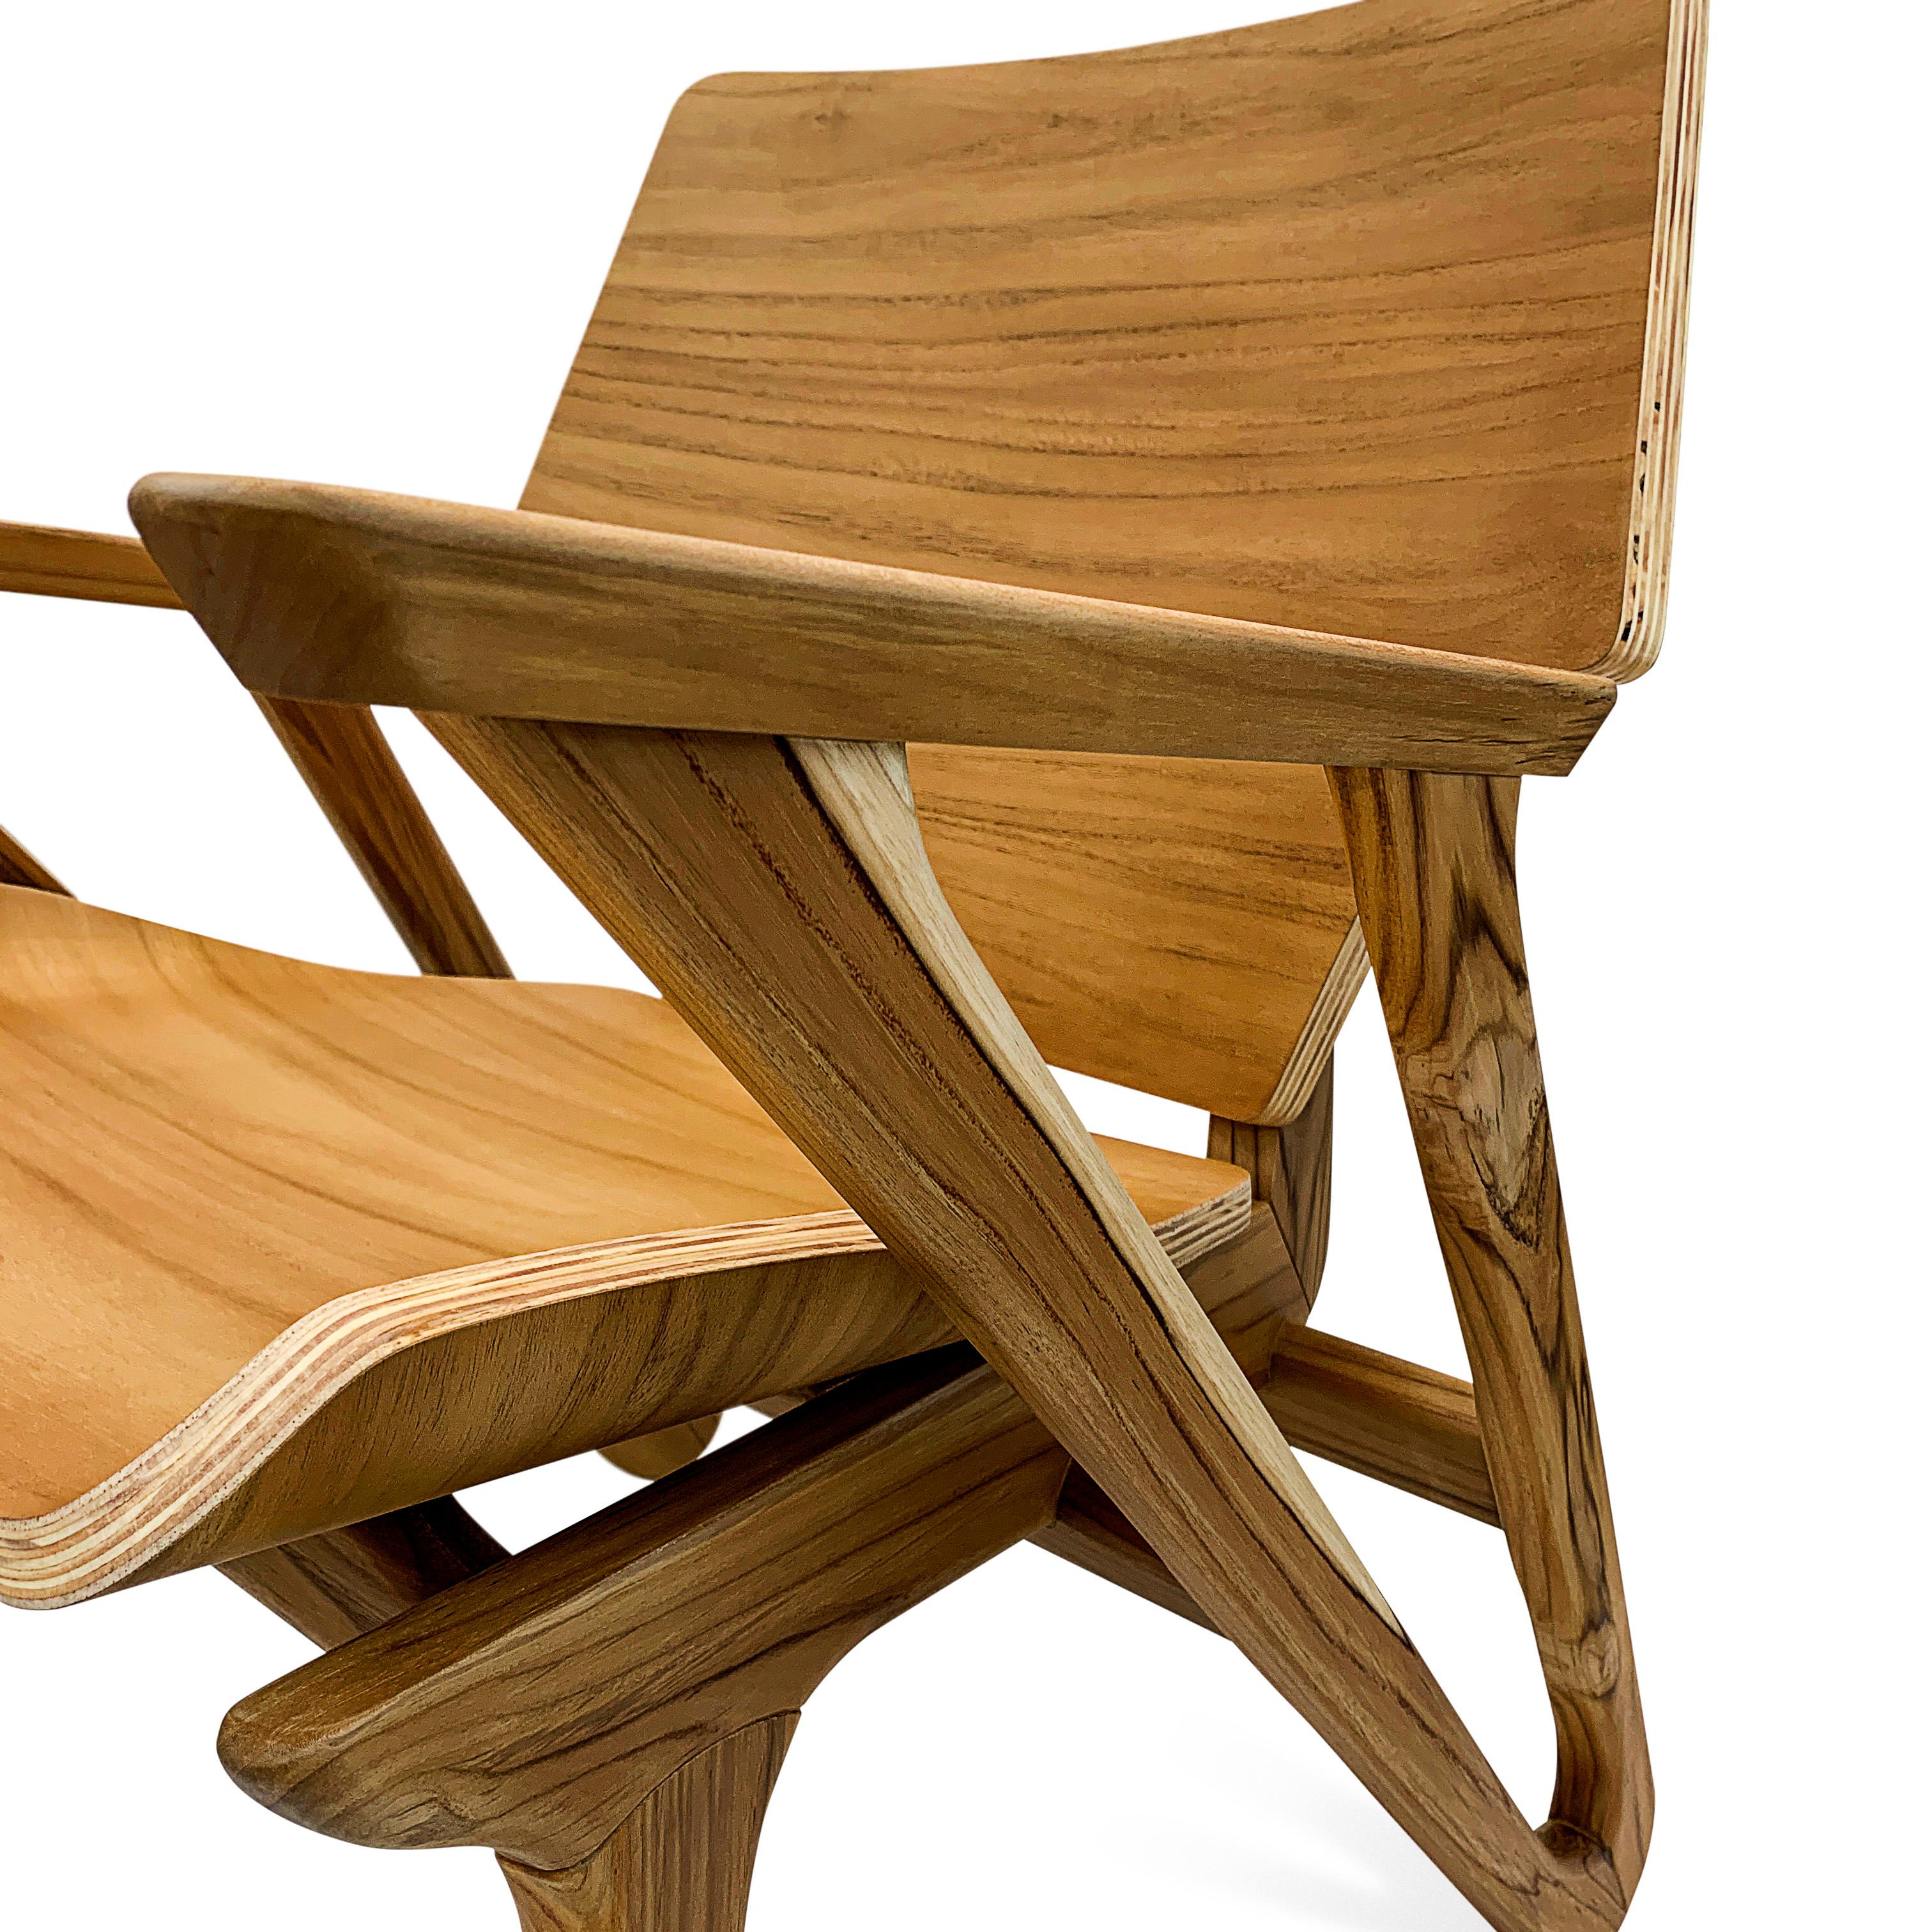 Contemporary Velo Armchair with Shaped Seat and Shaped Back in Teak Wood Finish For Sale